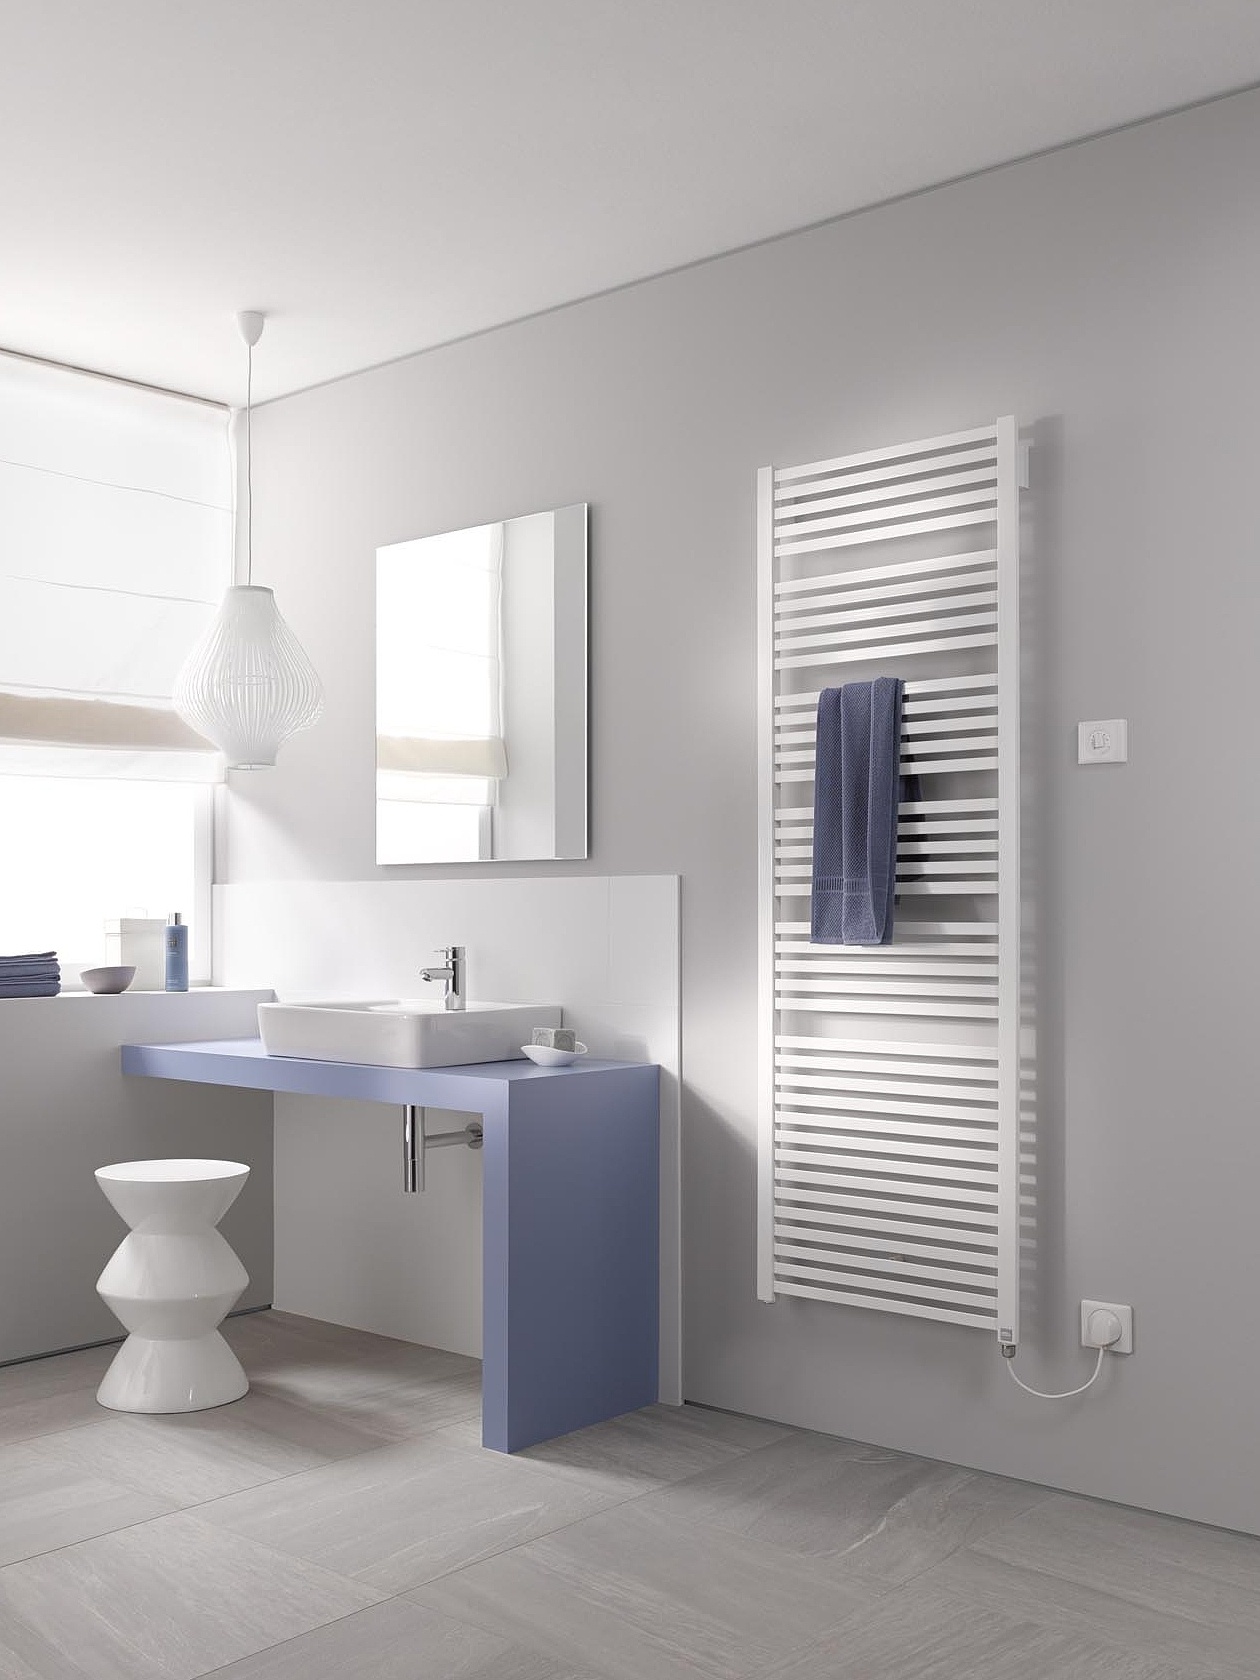 The Kermi Geneo quadris designer and bathroom radiator is also available in an electric version.